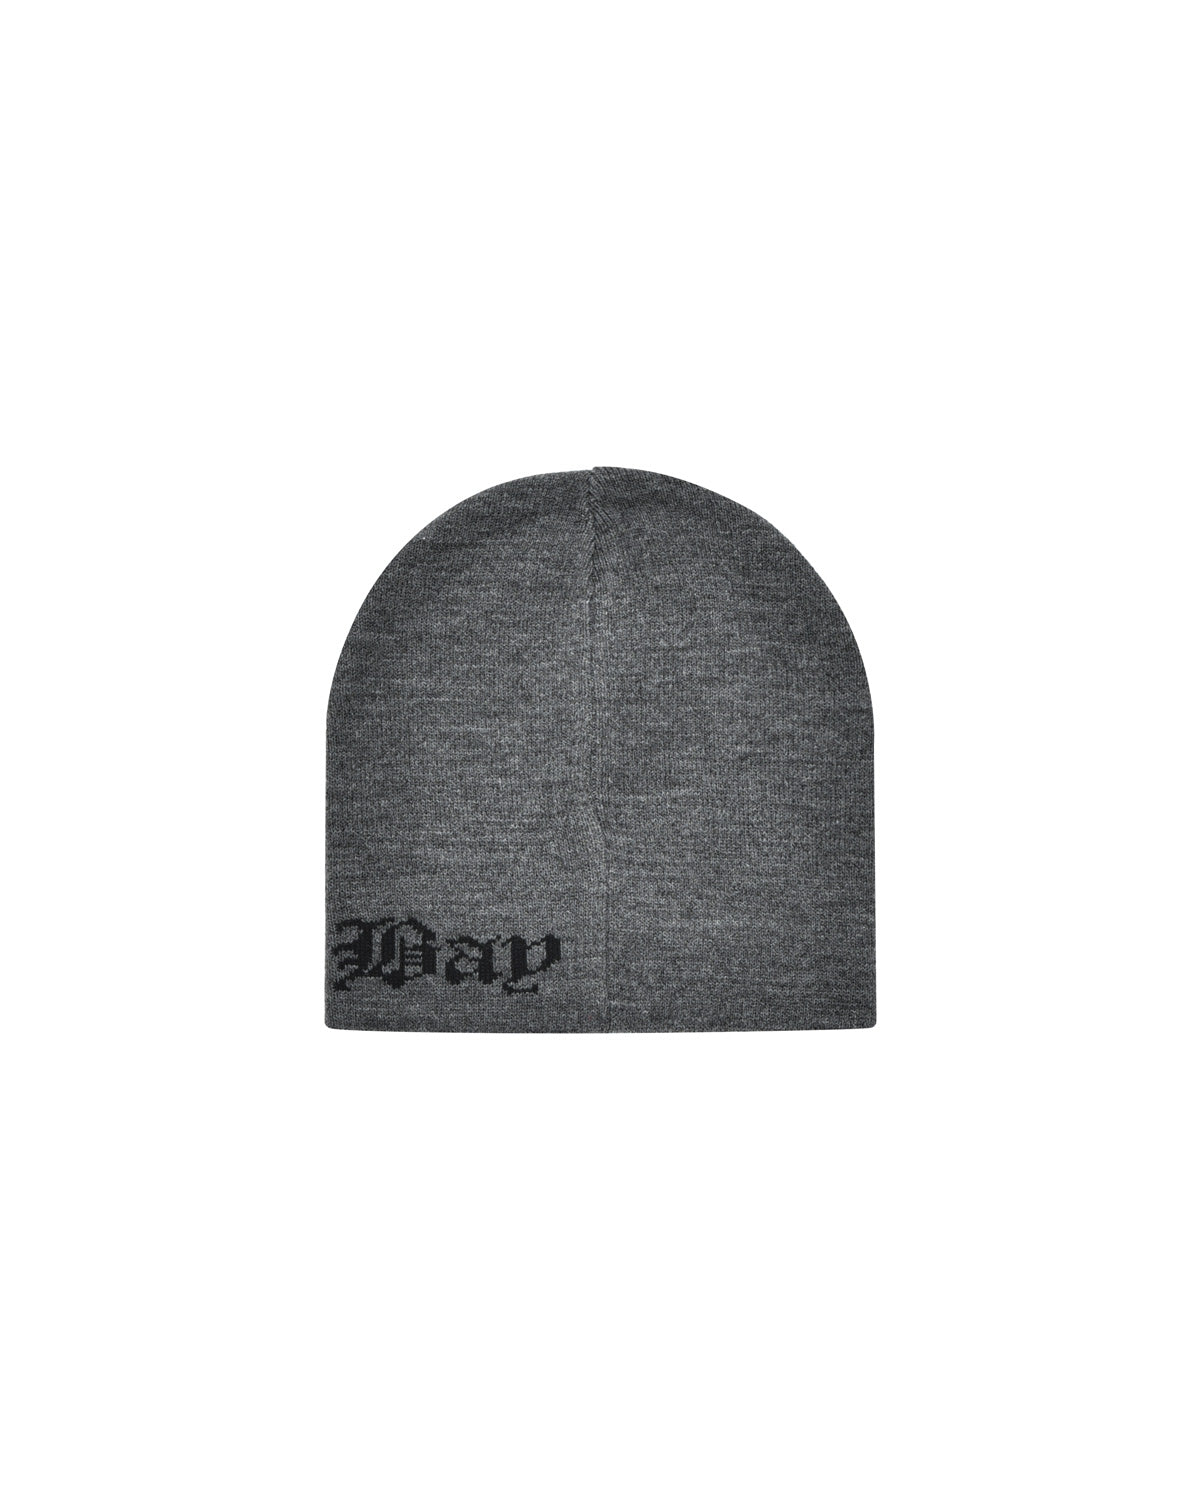 Doubleface Ritual Gray Knitted Beanie